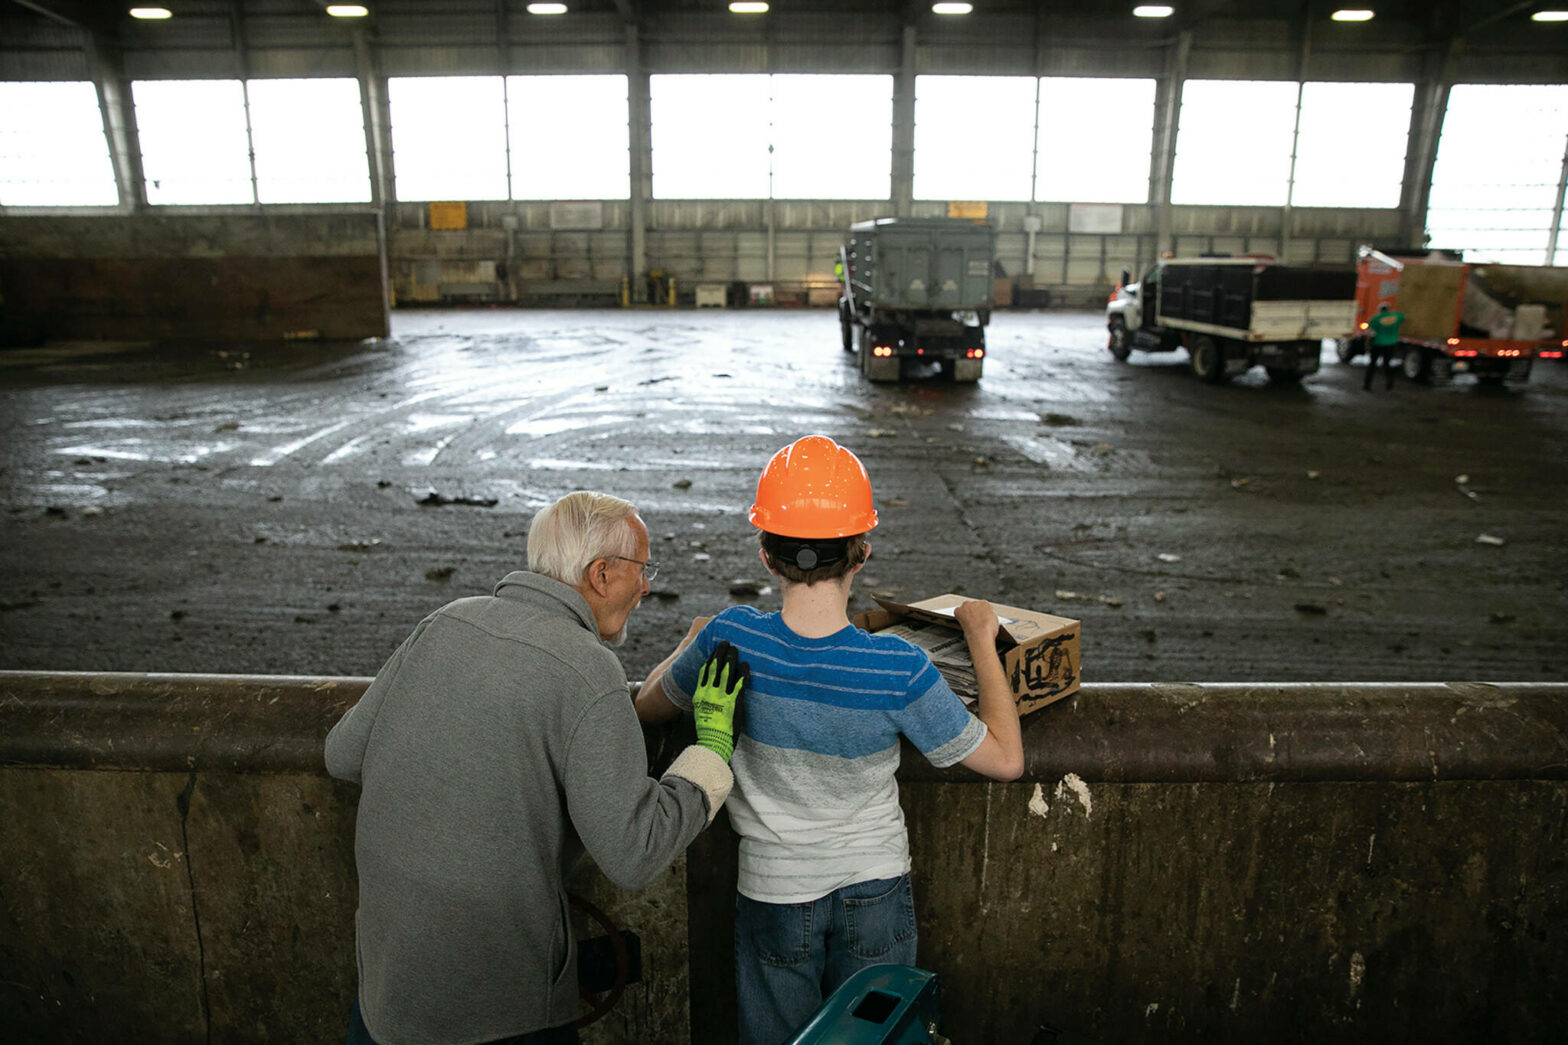 Joel Christensen, 24, cannot see or fully hear due to infantile refsum disease. With grandfather Harold at his side, Christensen tosses trash into the pit at the Airport Road Transfer Station in Everett. Going to the transfer station is one of Christenens favorite activities. The vibration of humming machinery, the whooshing of front end loaders and the tactile nature of his familys trash all stimulate his strongest senses. (Photo by Ryan Berry)